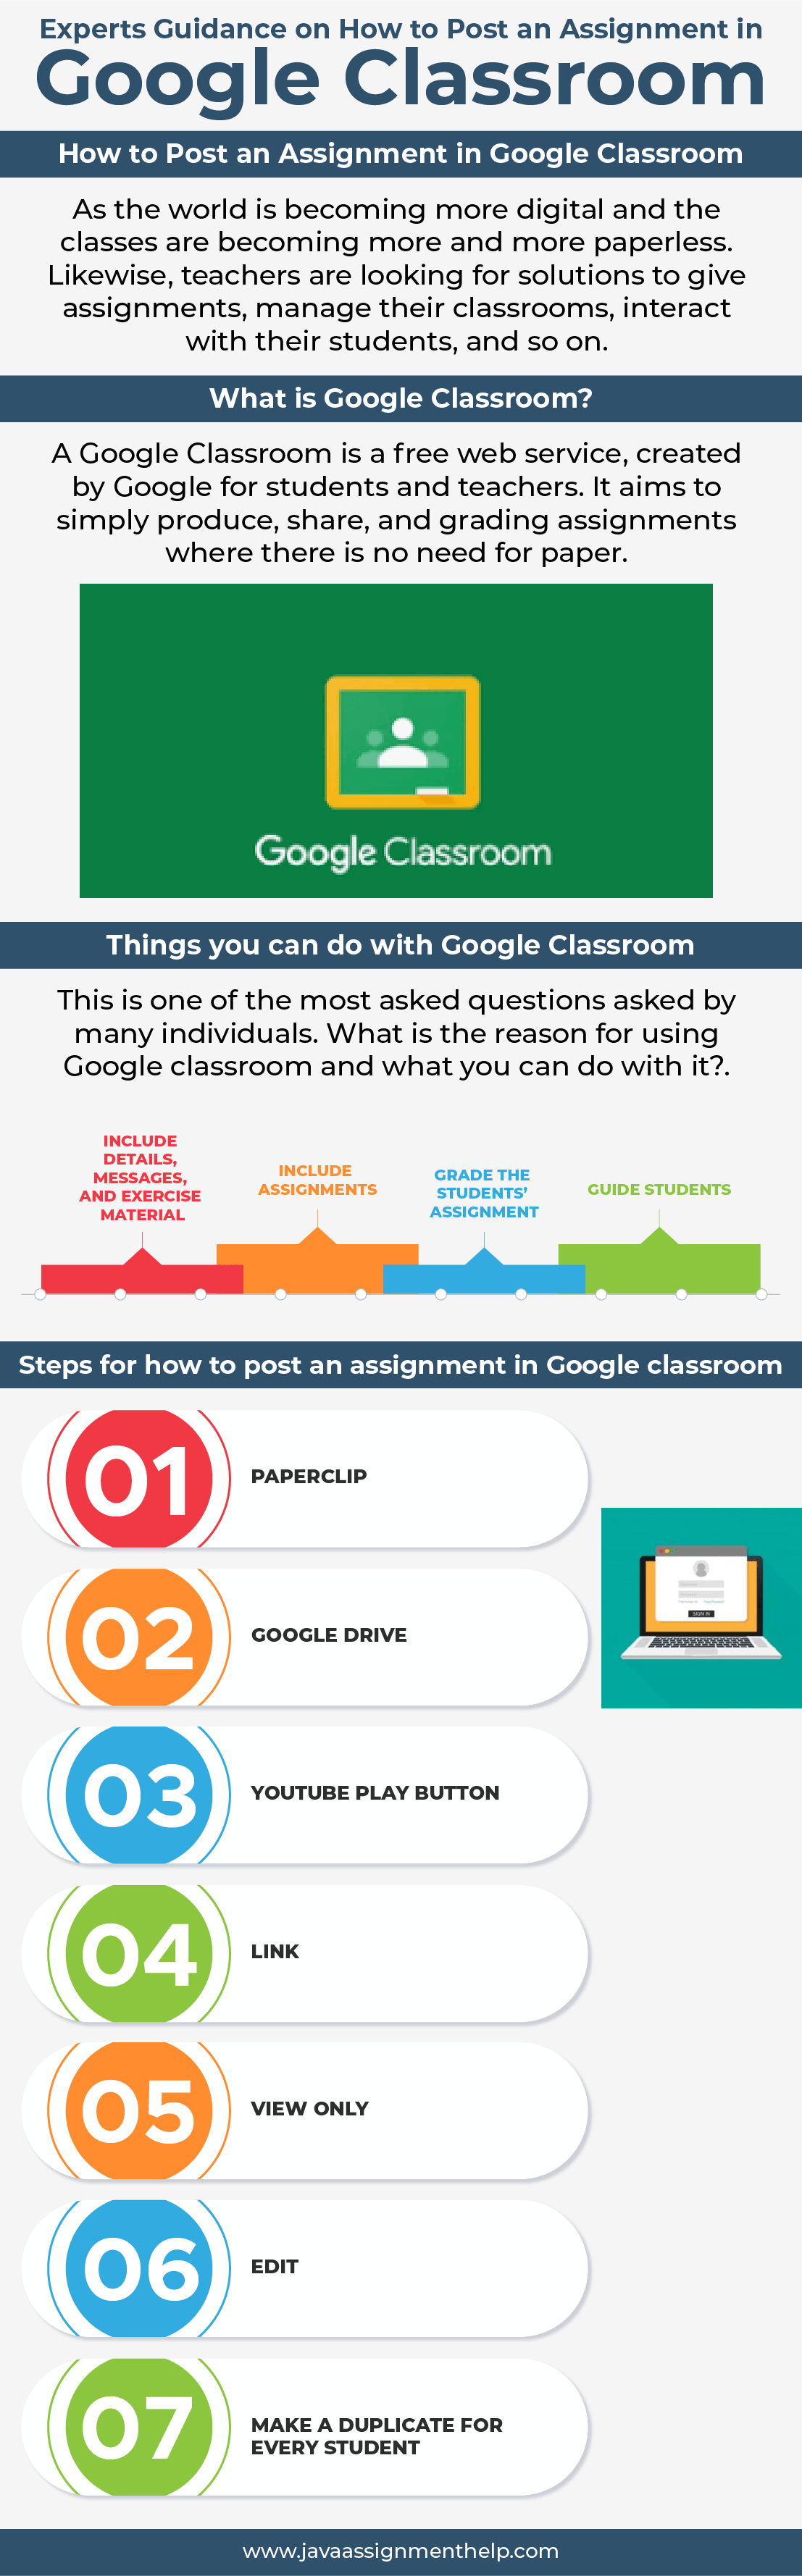 Experts Guidance on How to Post an Assignment in Google Classroom